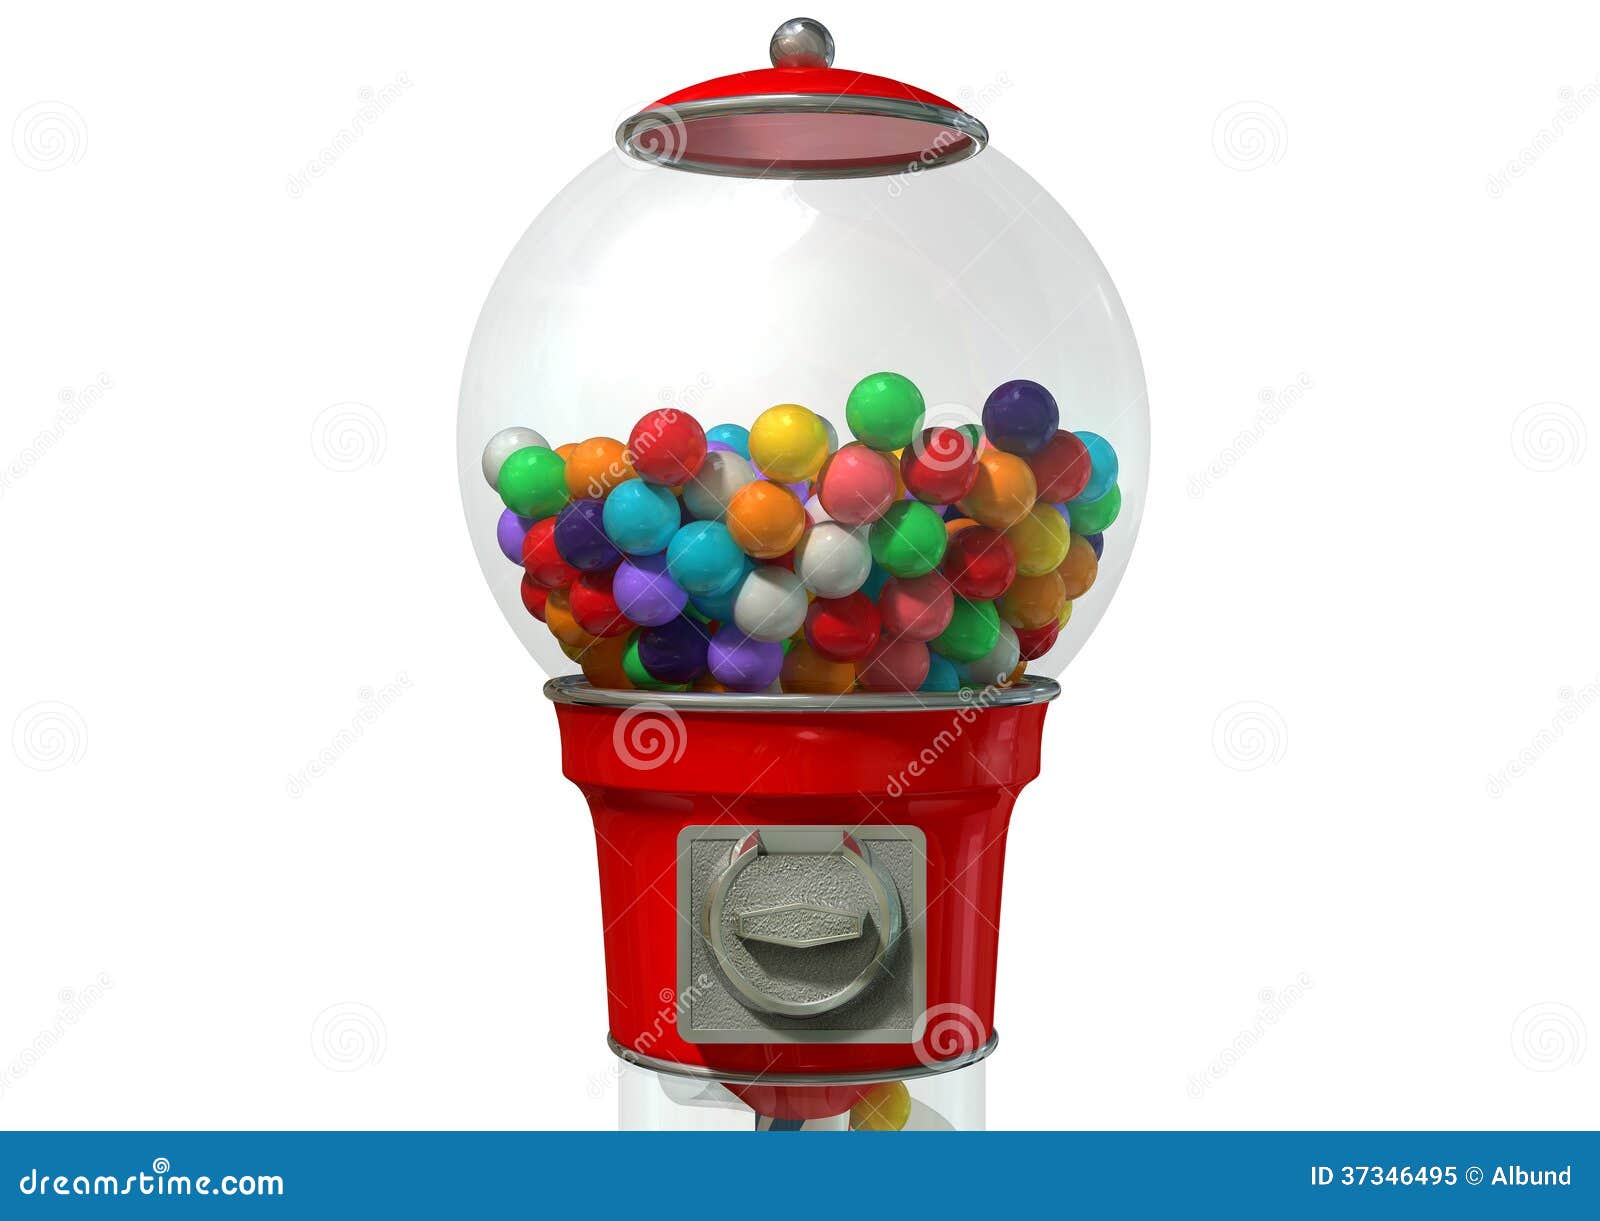 Gumball Dispensing Machine. A regular red vintage gumball dispenser machine made of glass and reflective plastic with chrome trim filled with multicolored gumballs on an white background